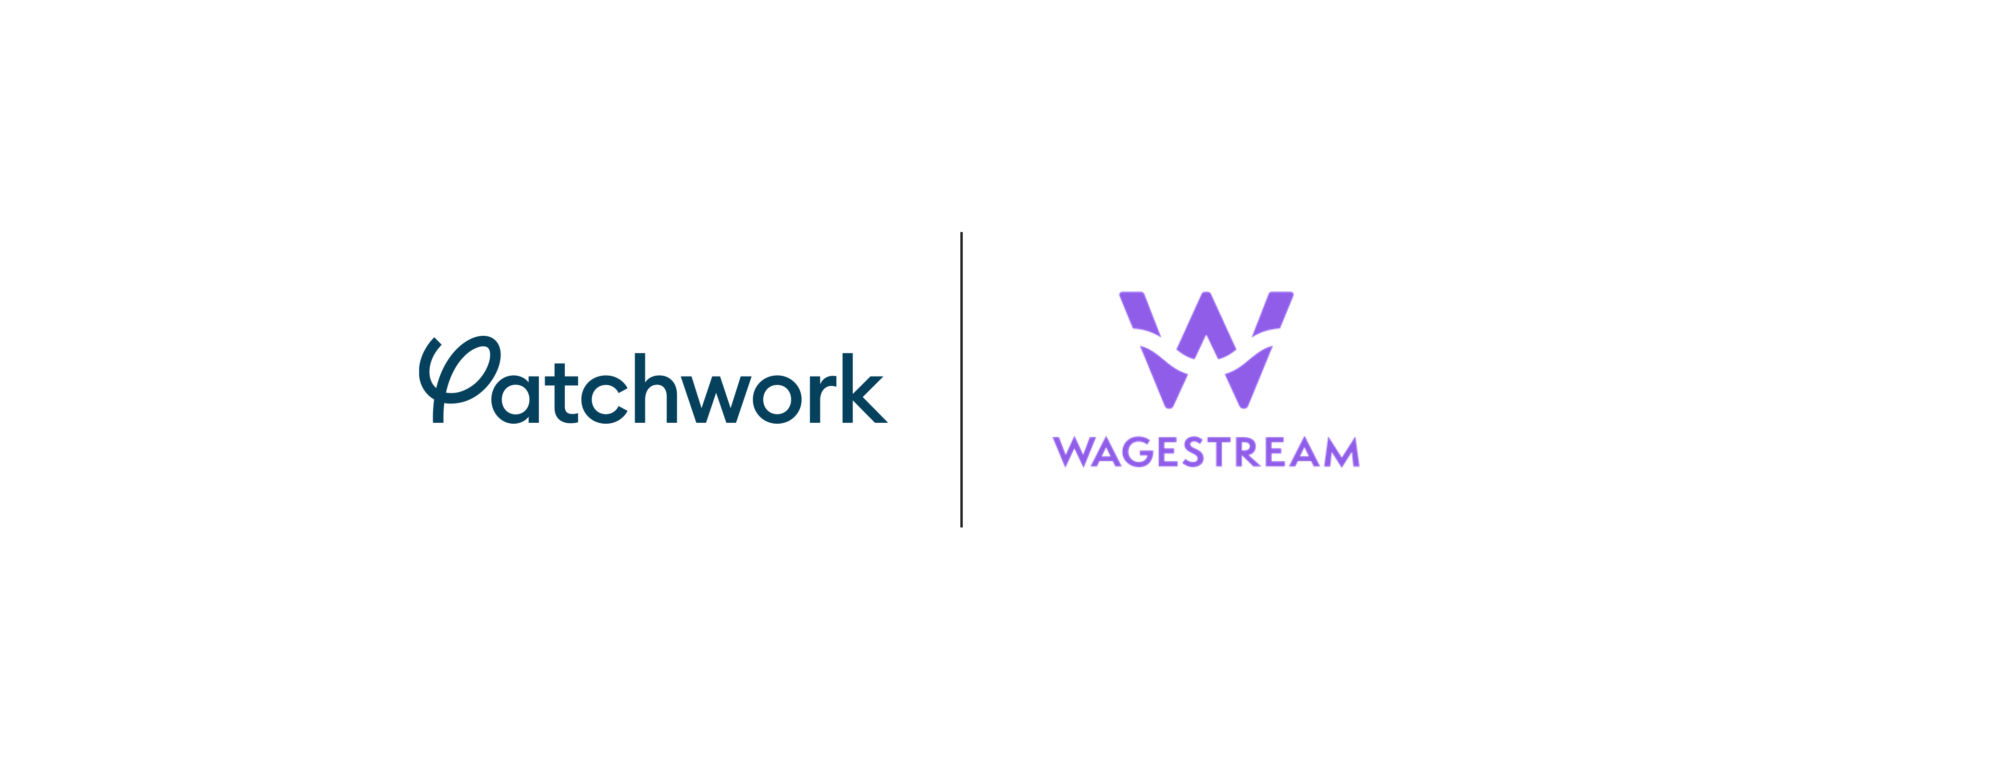 Patchwork and Wagestream partnership.